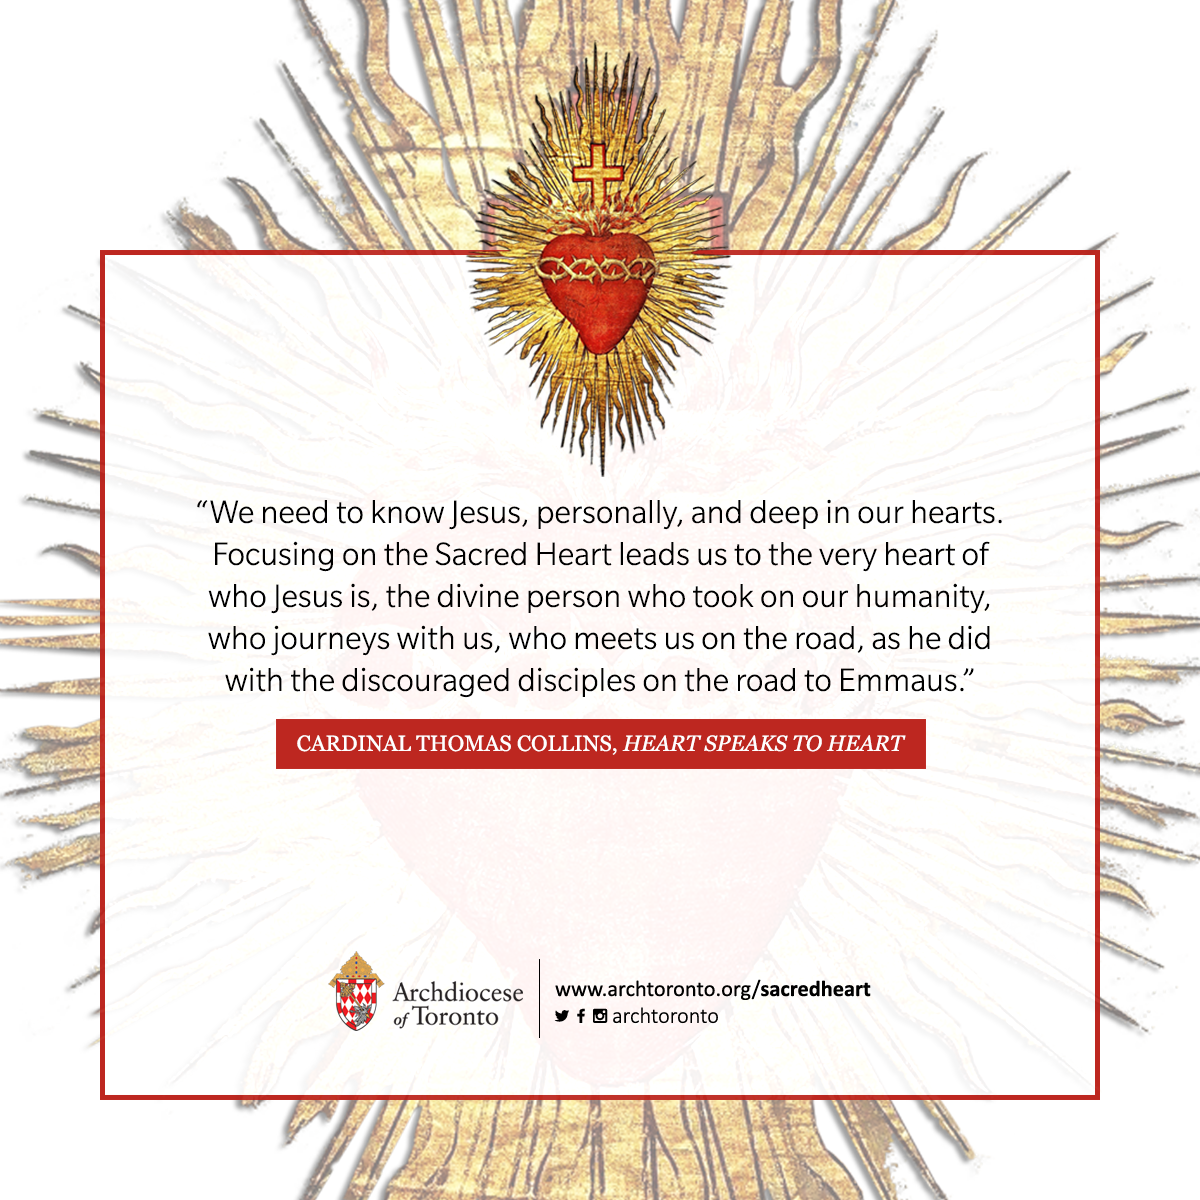 We need to know Jesus, personally, and deep in our hearts. Focusing on the Sacred Heart leads us to the very heart of who Jesus is, the divine person who took on our humanity, who journeys with us, who meets us on the road, as he did with the discouraged disciples on the road to Emmaus.